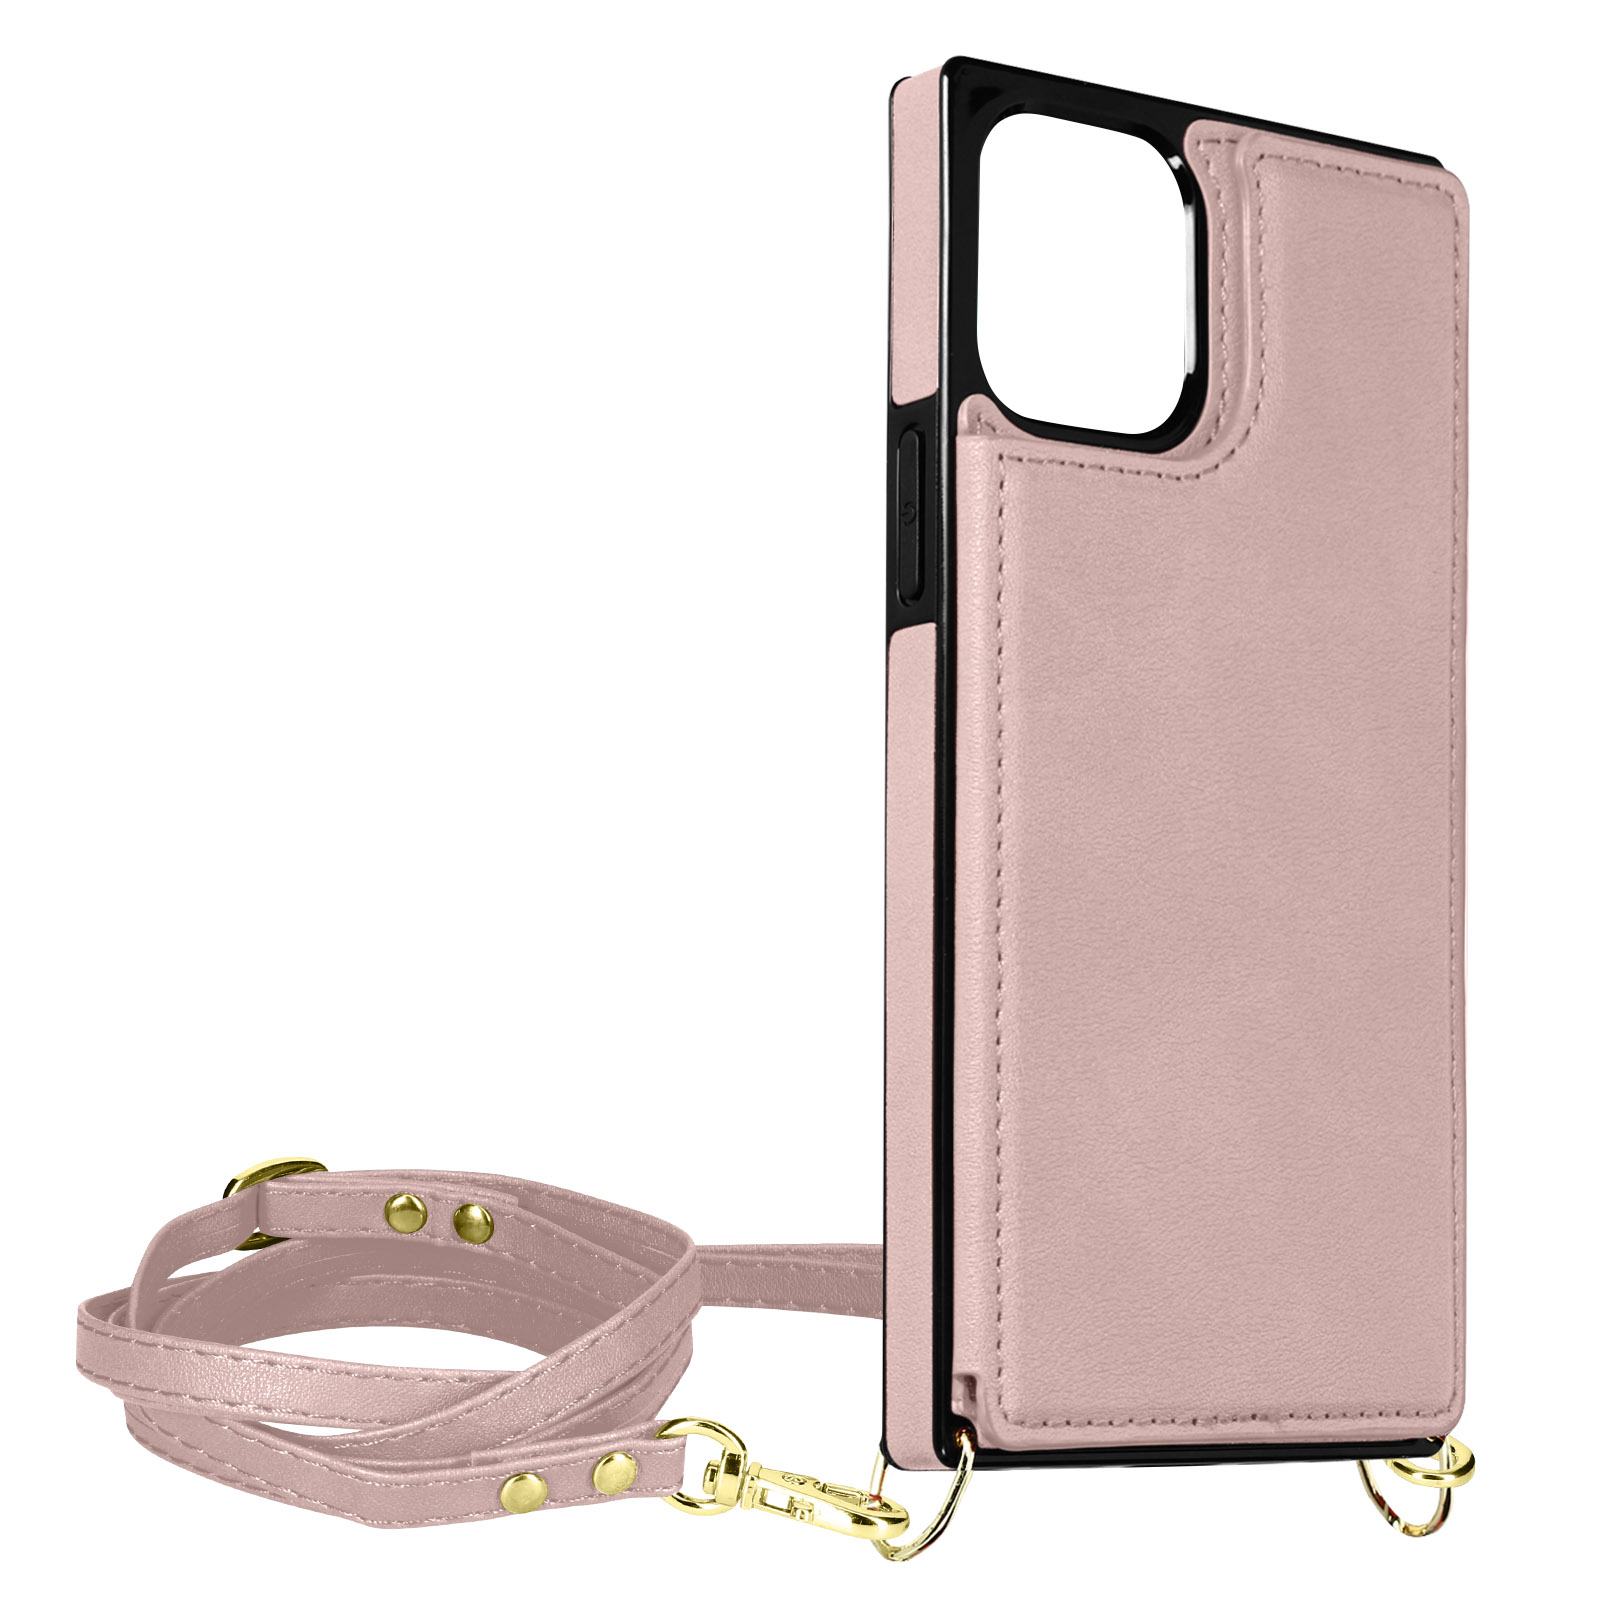 AVIZAR Darling Series, Backcover, Rosegold 12 Max, Pro Apple, iPhone